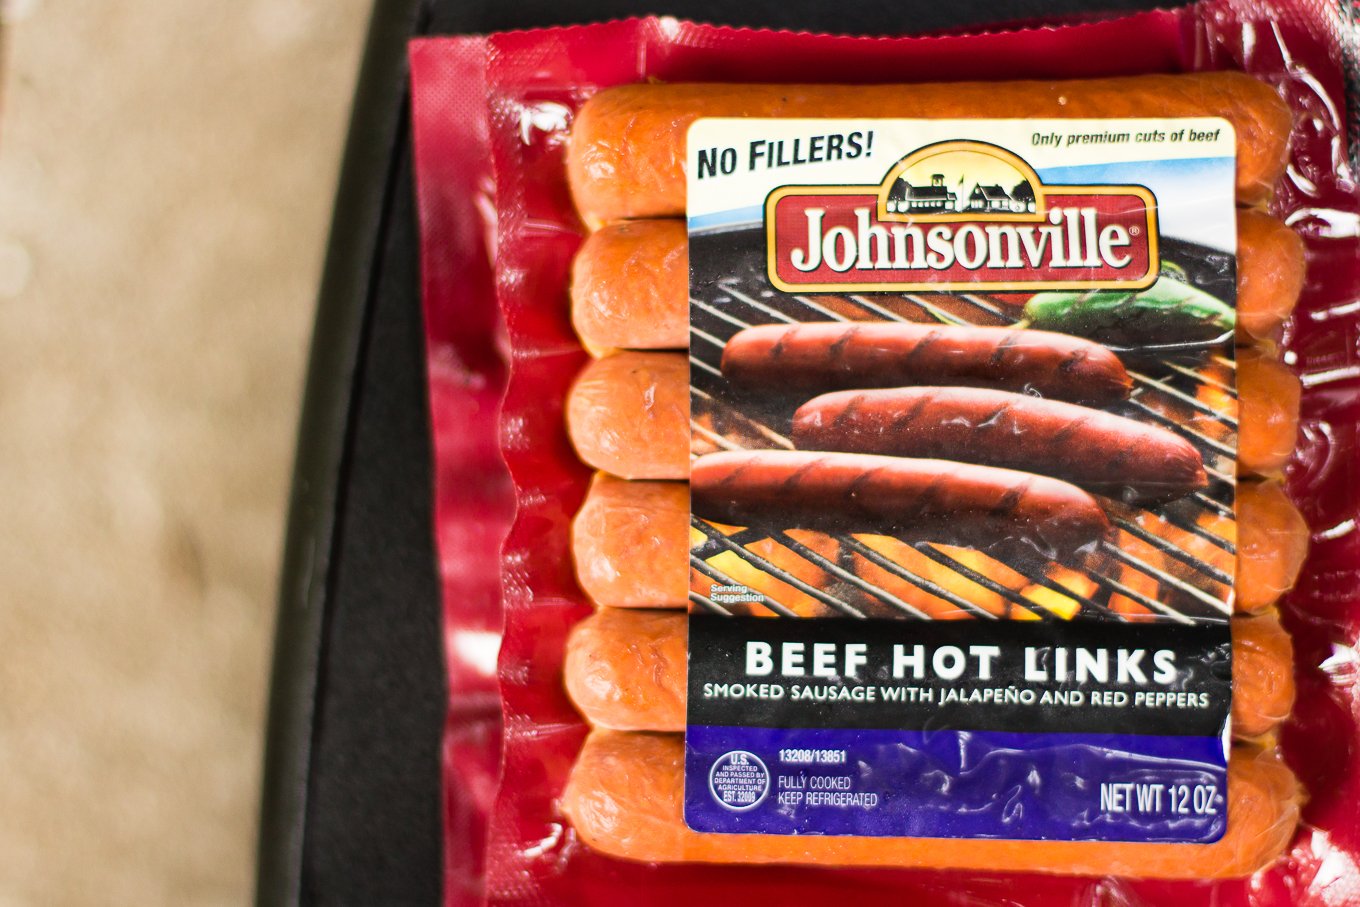 johnsonville, grilling, how to grill, 4th of july grilling, cooking